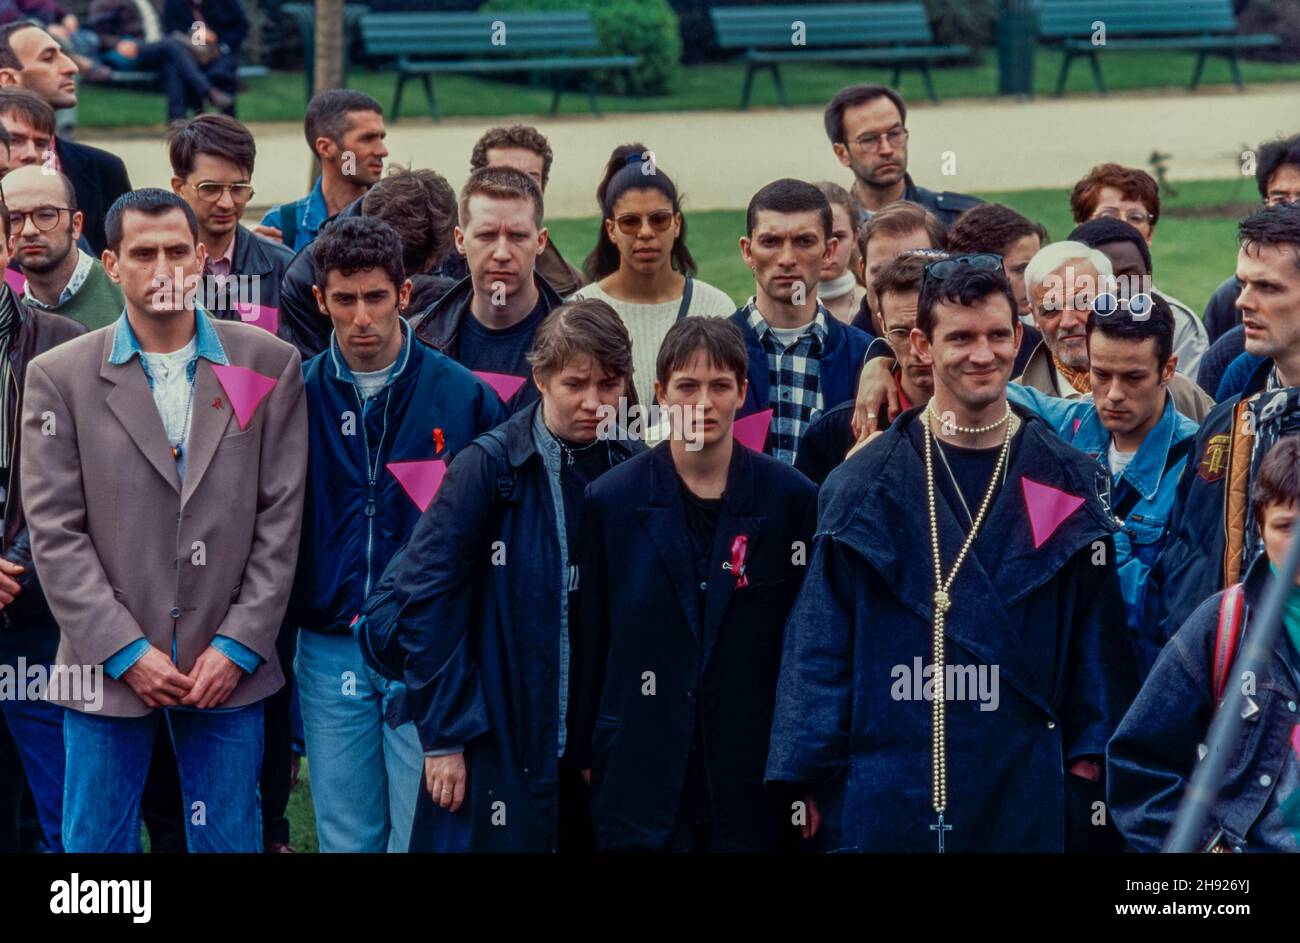 Paris, France, Croxd LGBTQI+ young lesbians and gay men at Memorial Ceremony Homosexuel Deportation, WWII AND pink triangle, Wearing symbolic Pink Triangle, violence against gay men, gay protest vintage Stock Photo